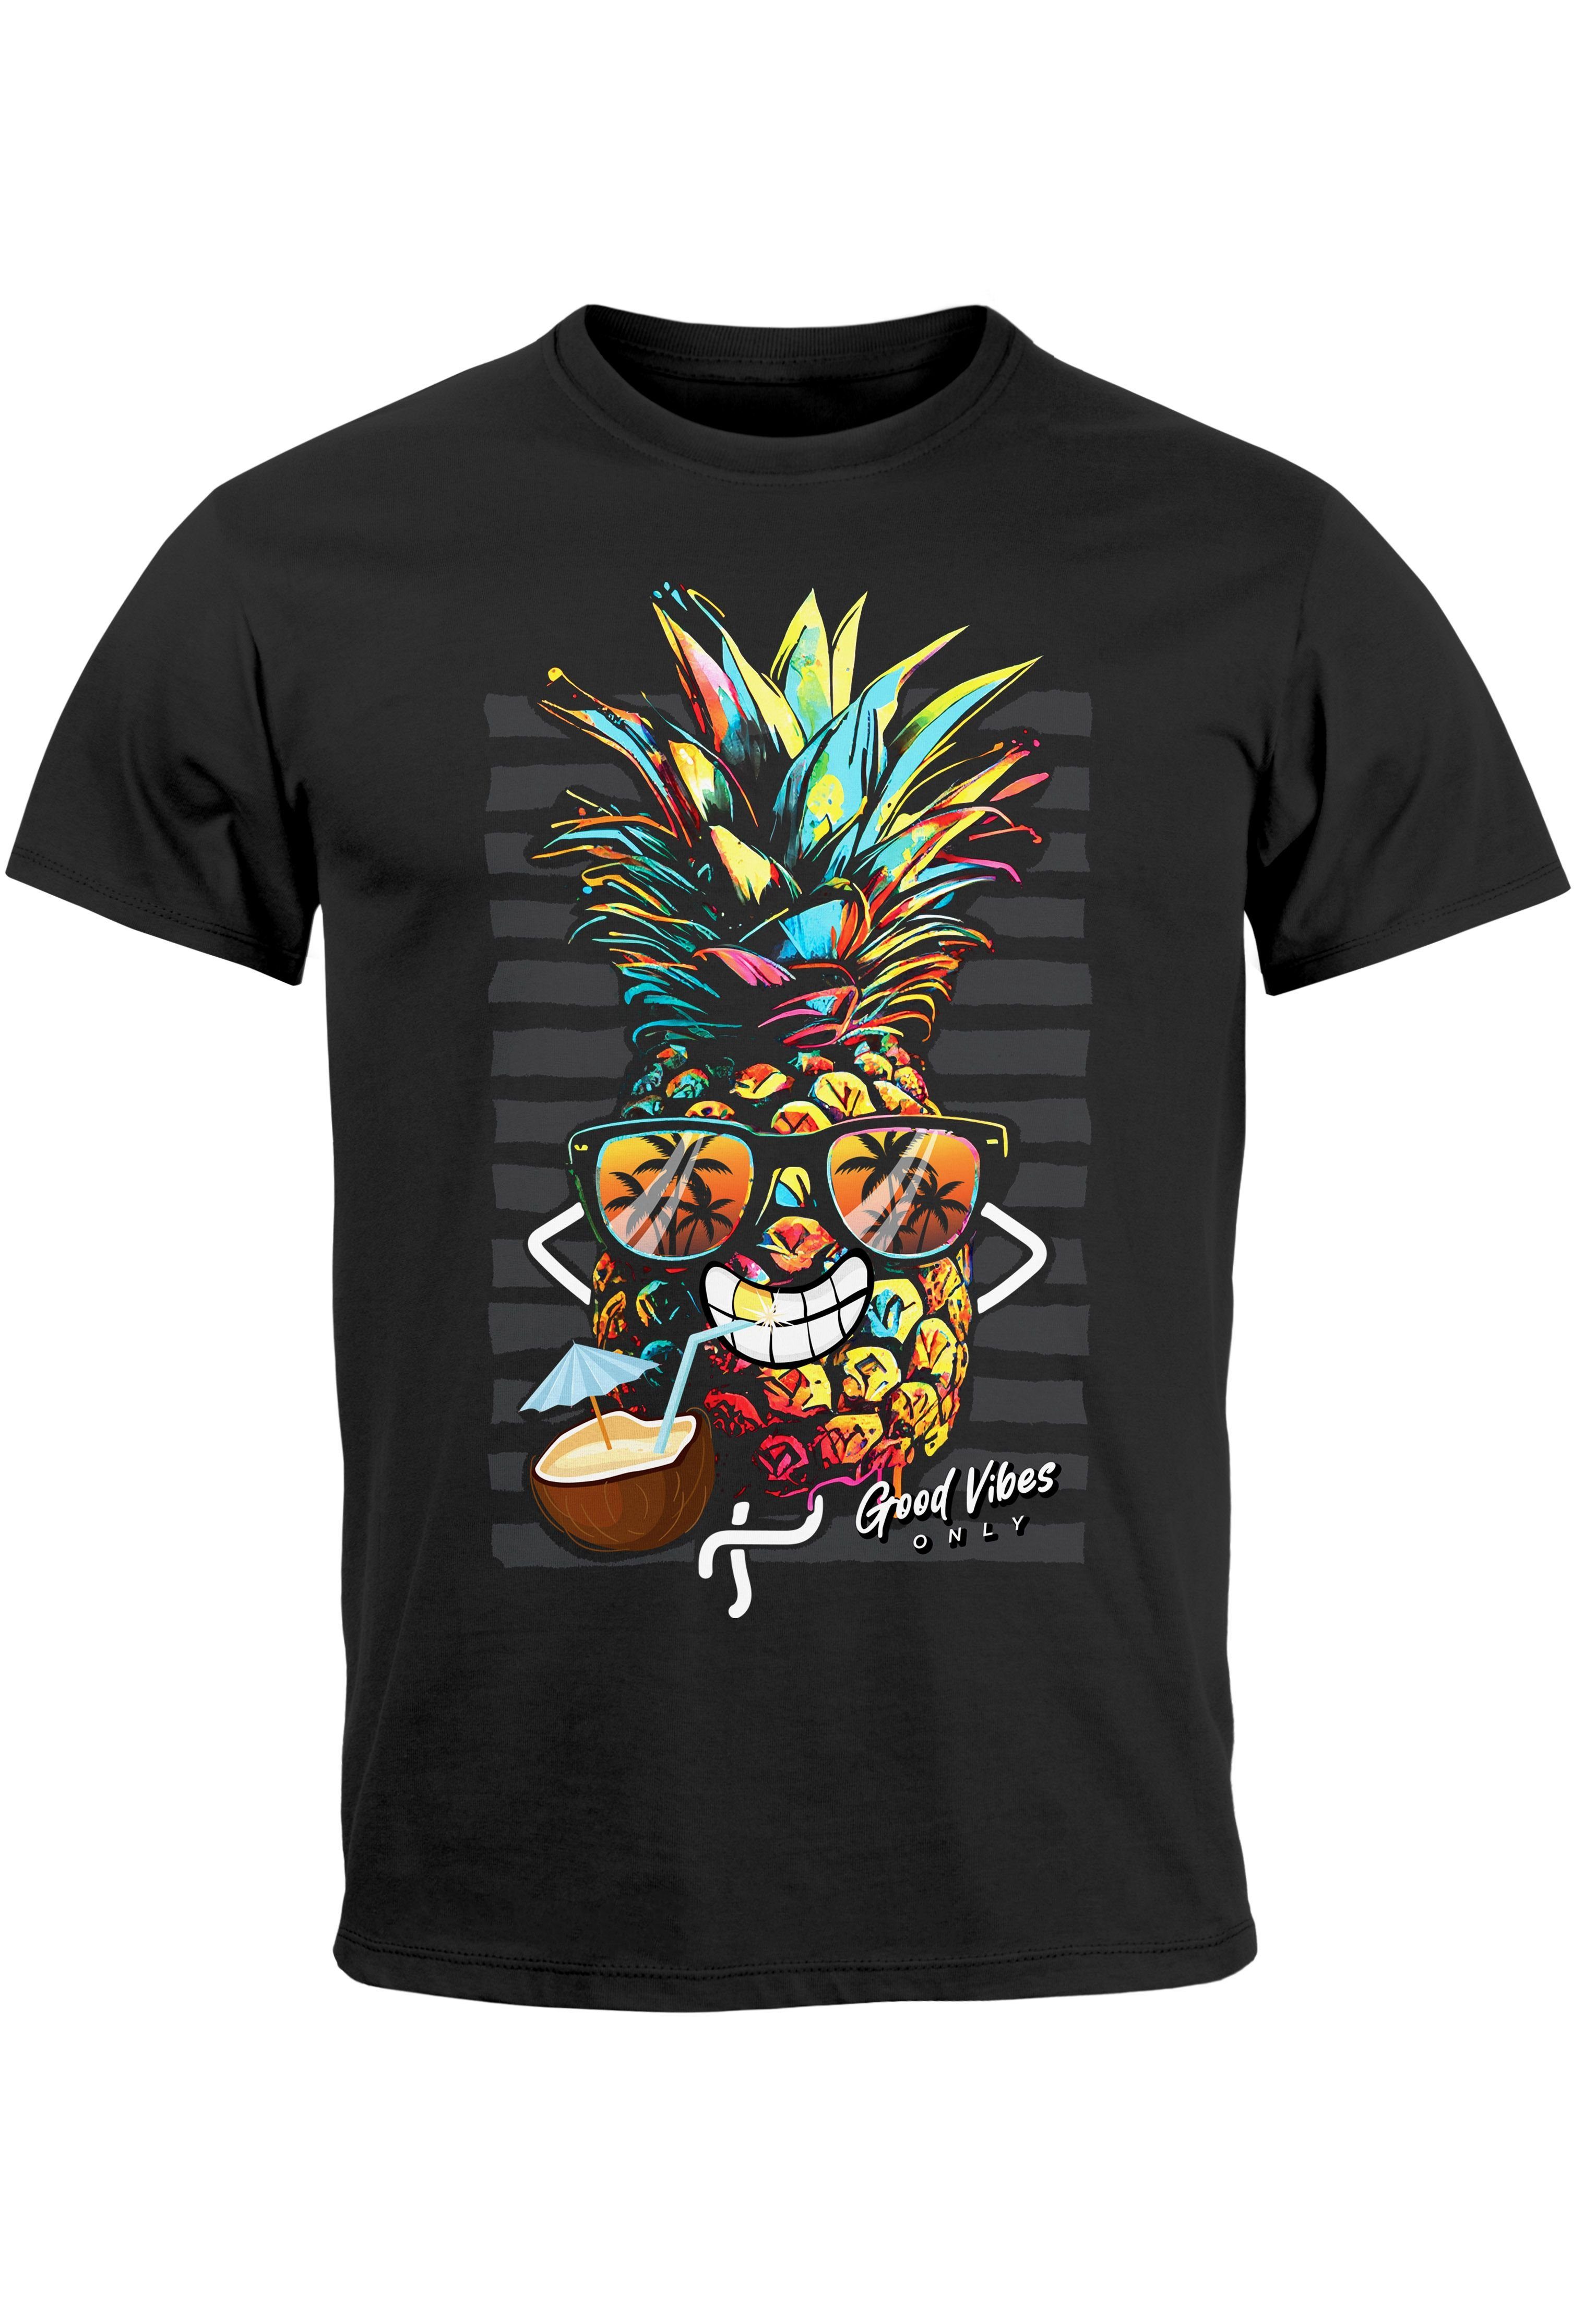 Neverless Print-Shirt Herren T-Shirt Ananas Good Vibes Sommer Sonne Party Cocktail Fashion S mit Print